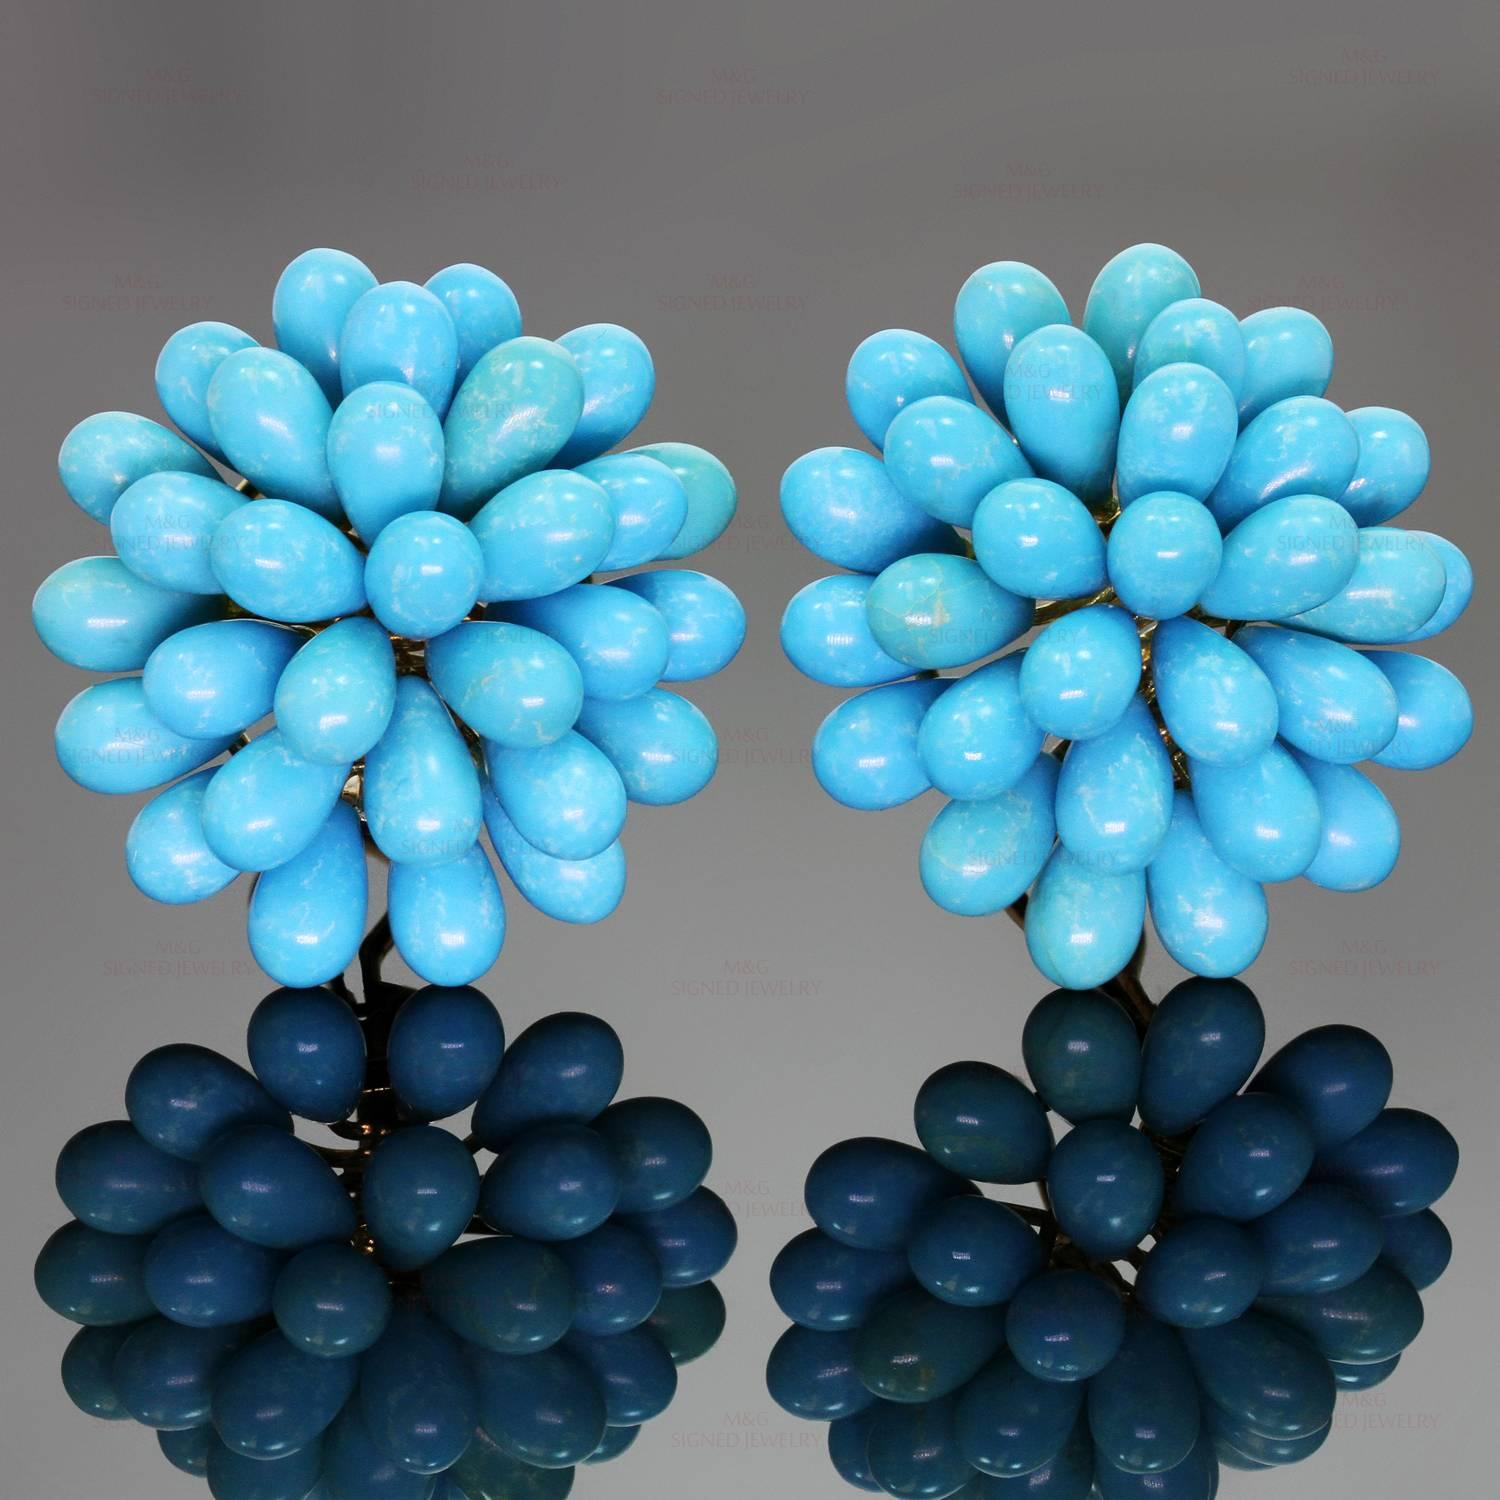 These vibrant lever-back earrings are crafted in 18k yellow gold and feature a cluster of natural turquoise stones with medium to medium deep blue color and good luster. Several stones are slightly faded greenish-blue, and one stone has a